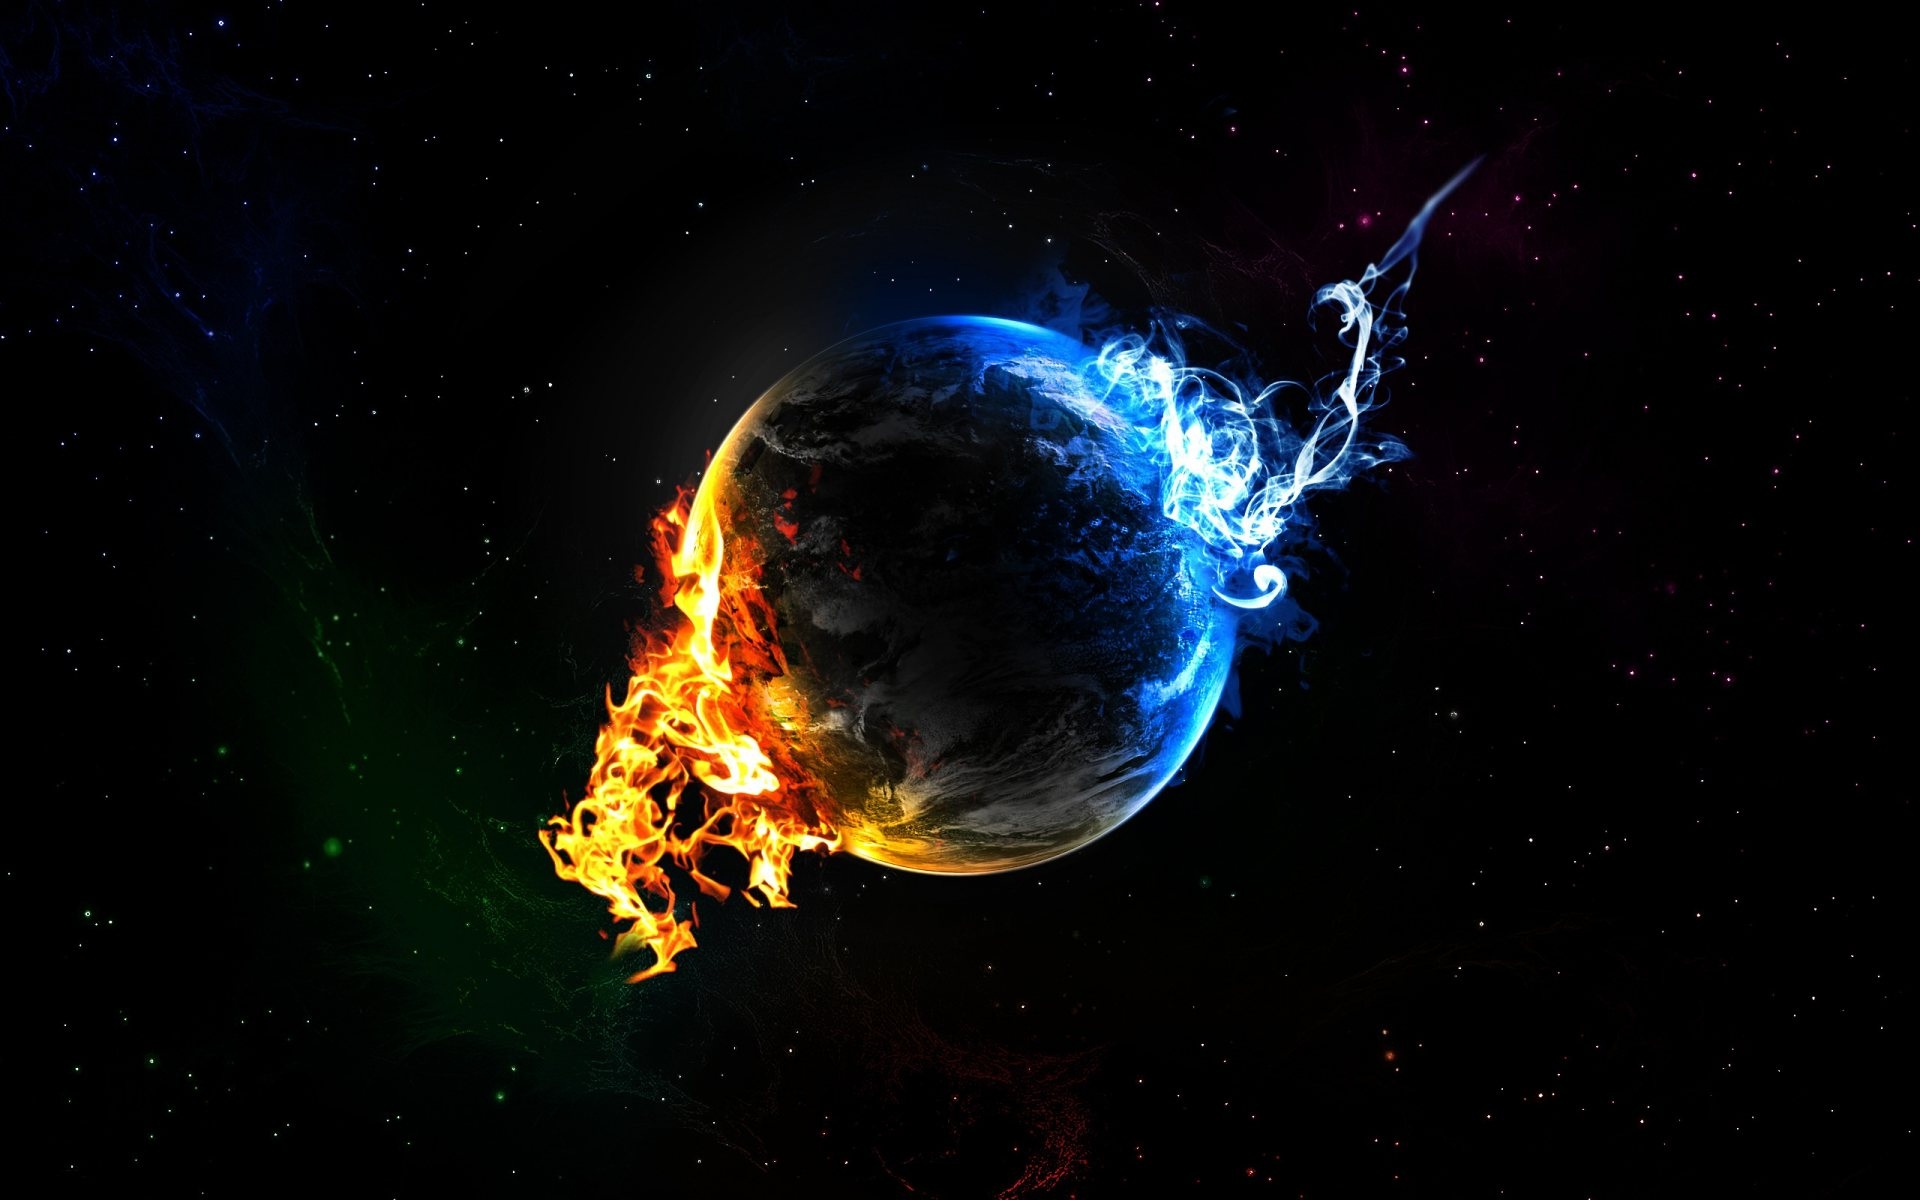 Fire And Ice HD wallpapers, Desktop wallpaper - most viewed